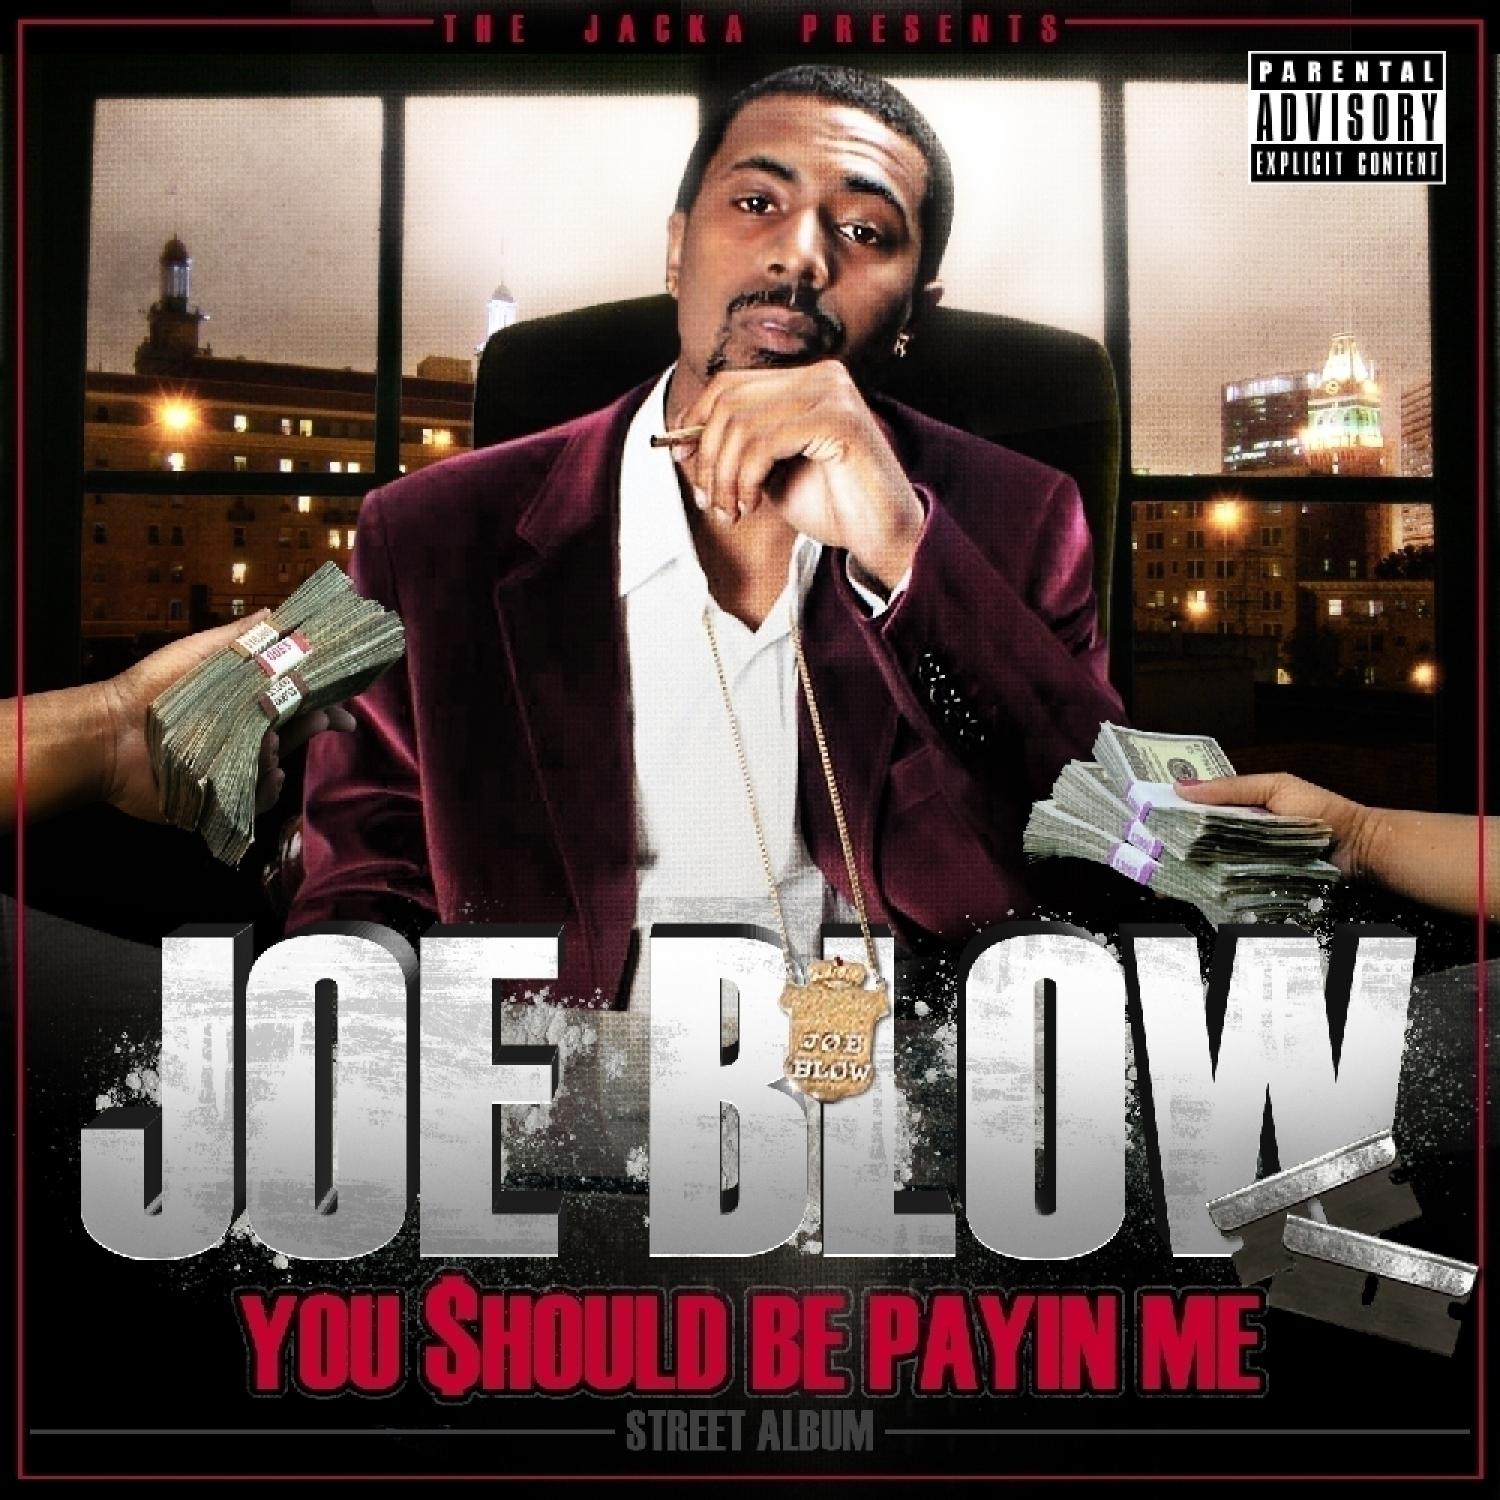 The Jacka Presents: You Should Be Payin Me